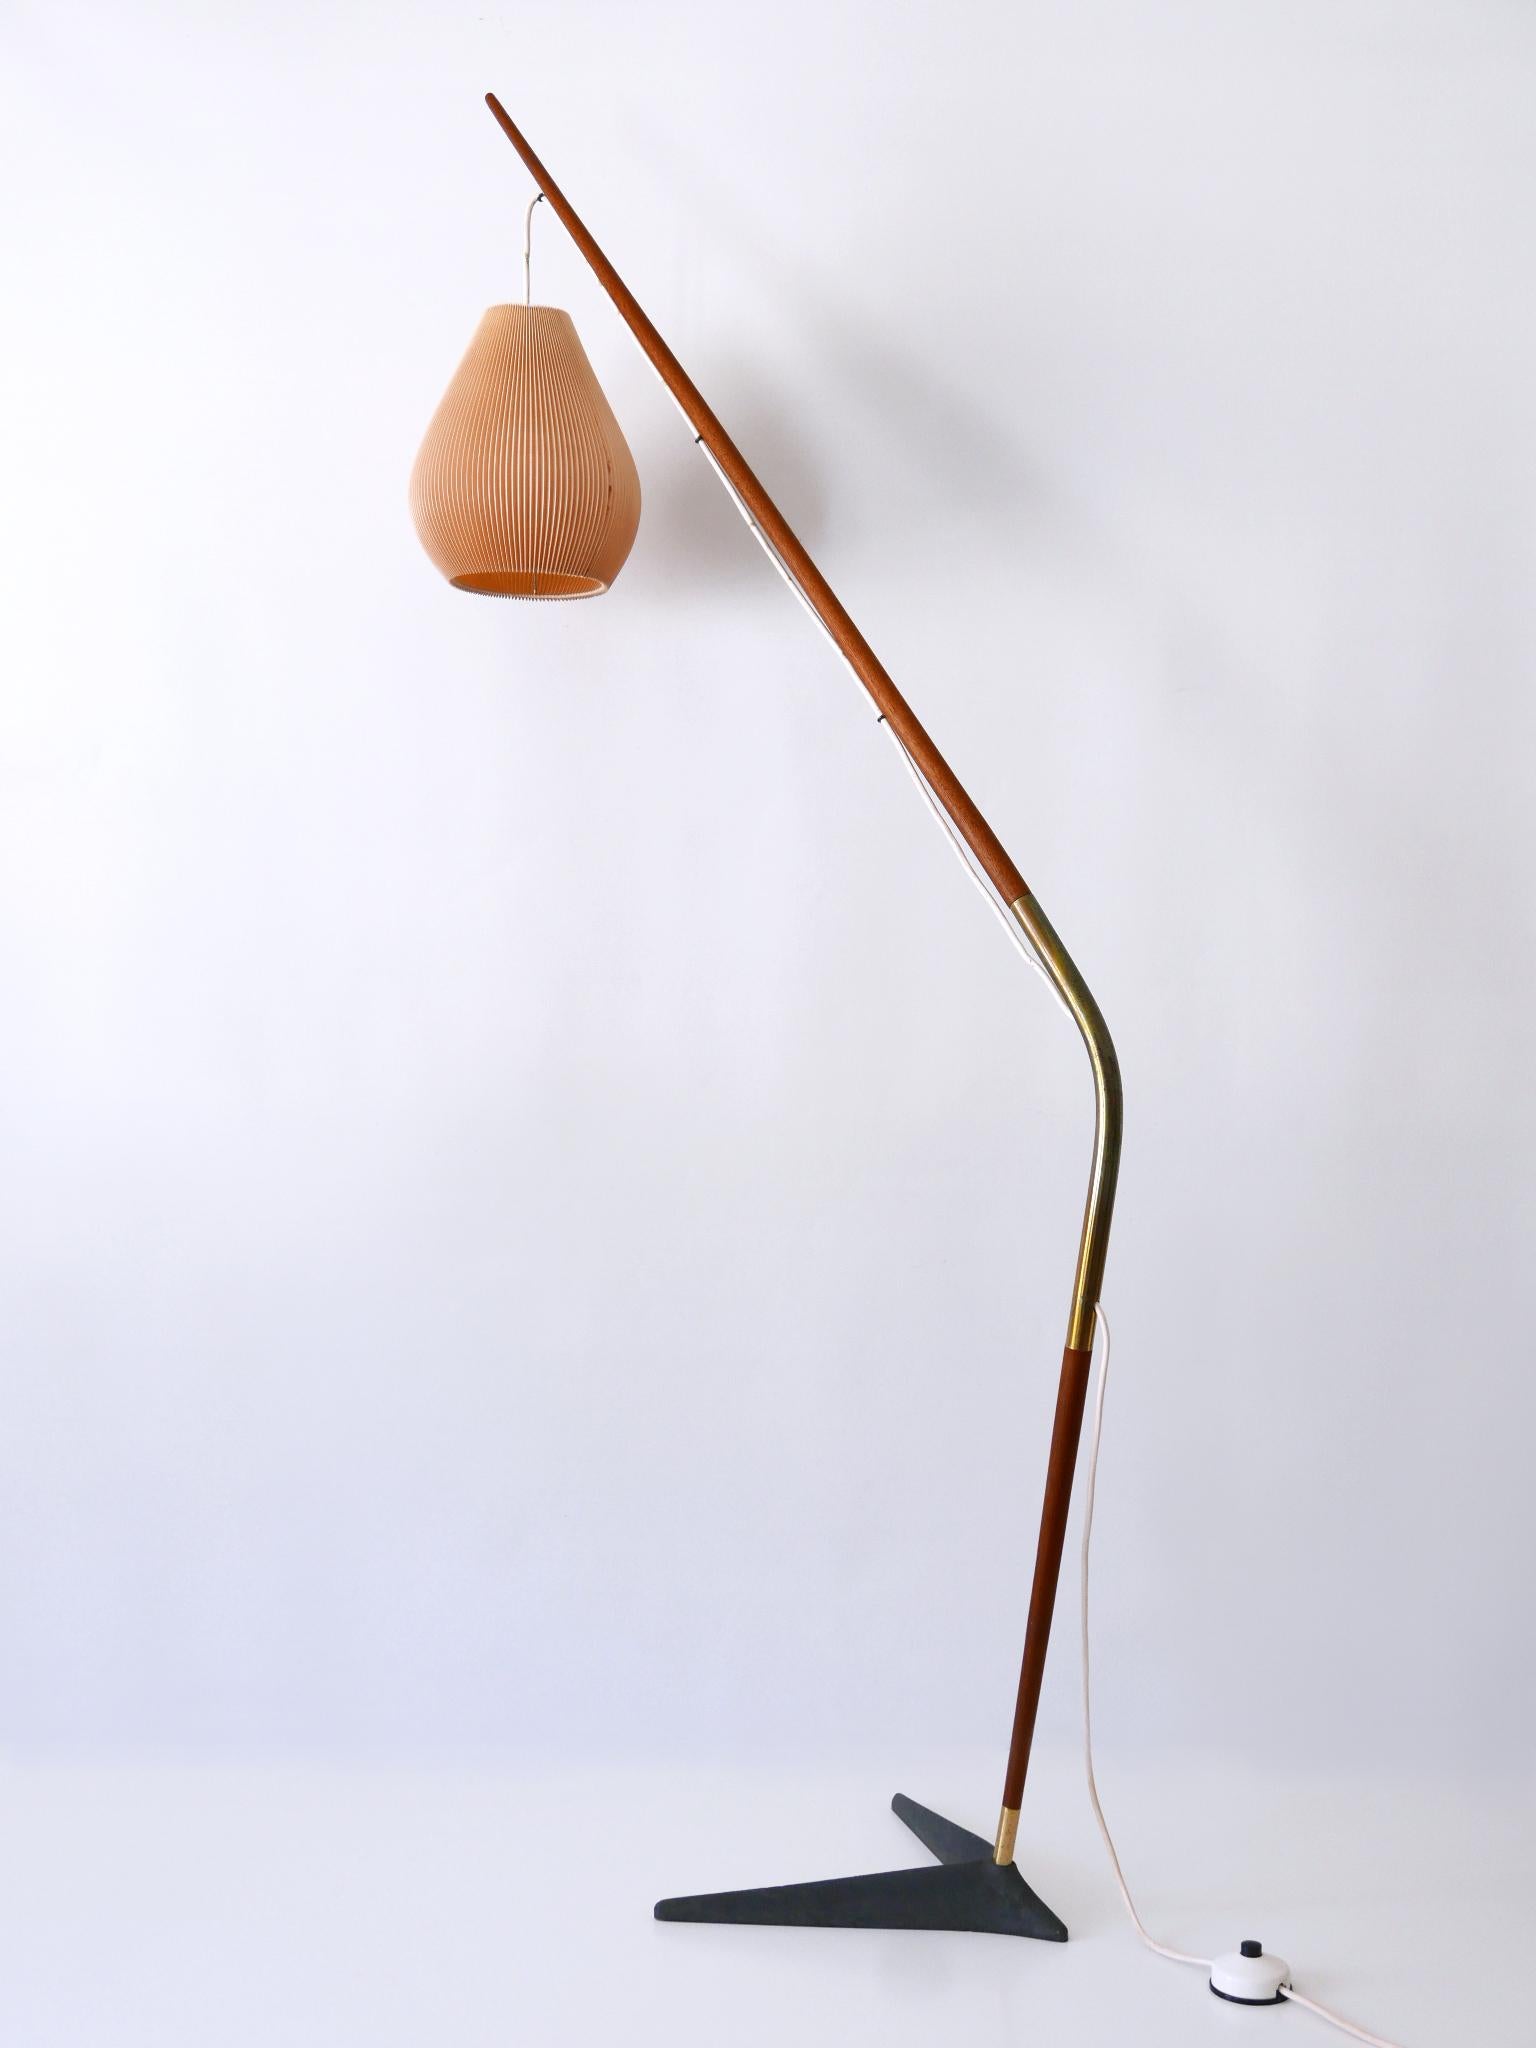 Exceptional 'Fishing Pole' Floor Lamp by Svend Aage Holm Sørensen Denmark 1950s For Sale 4